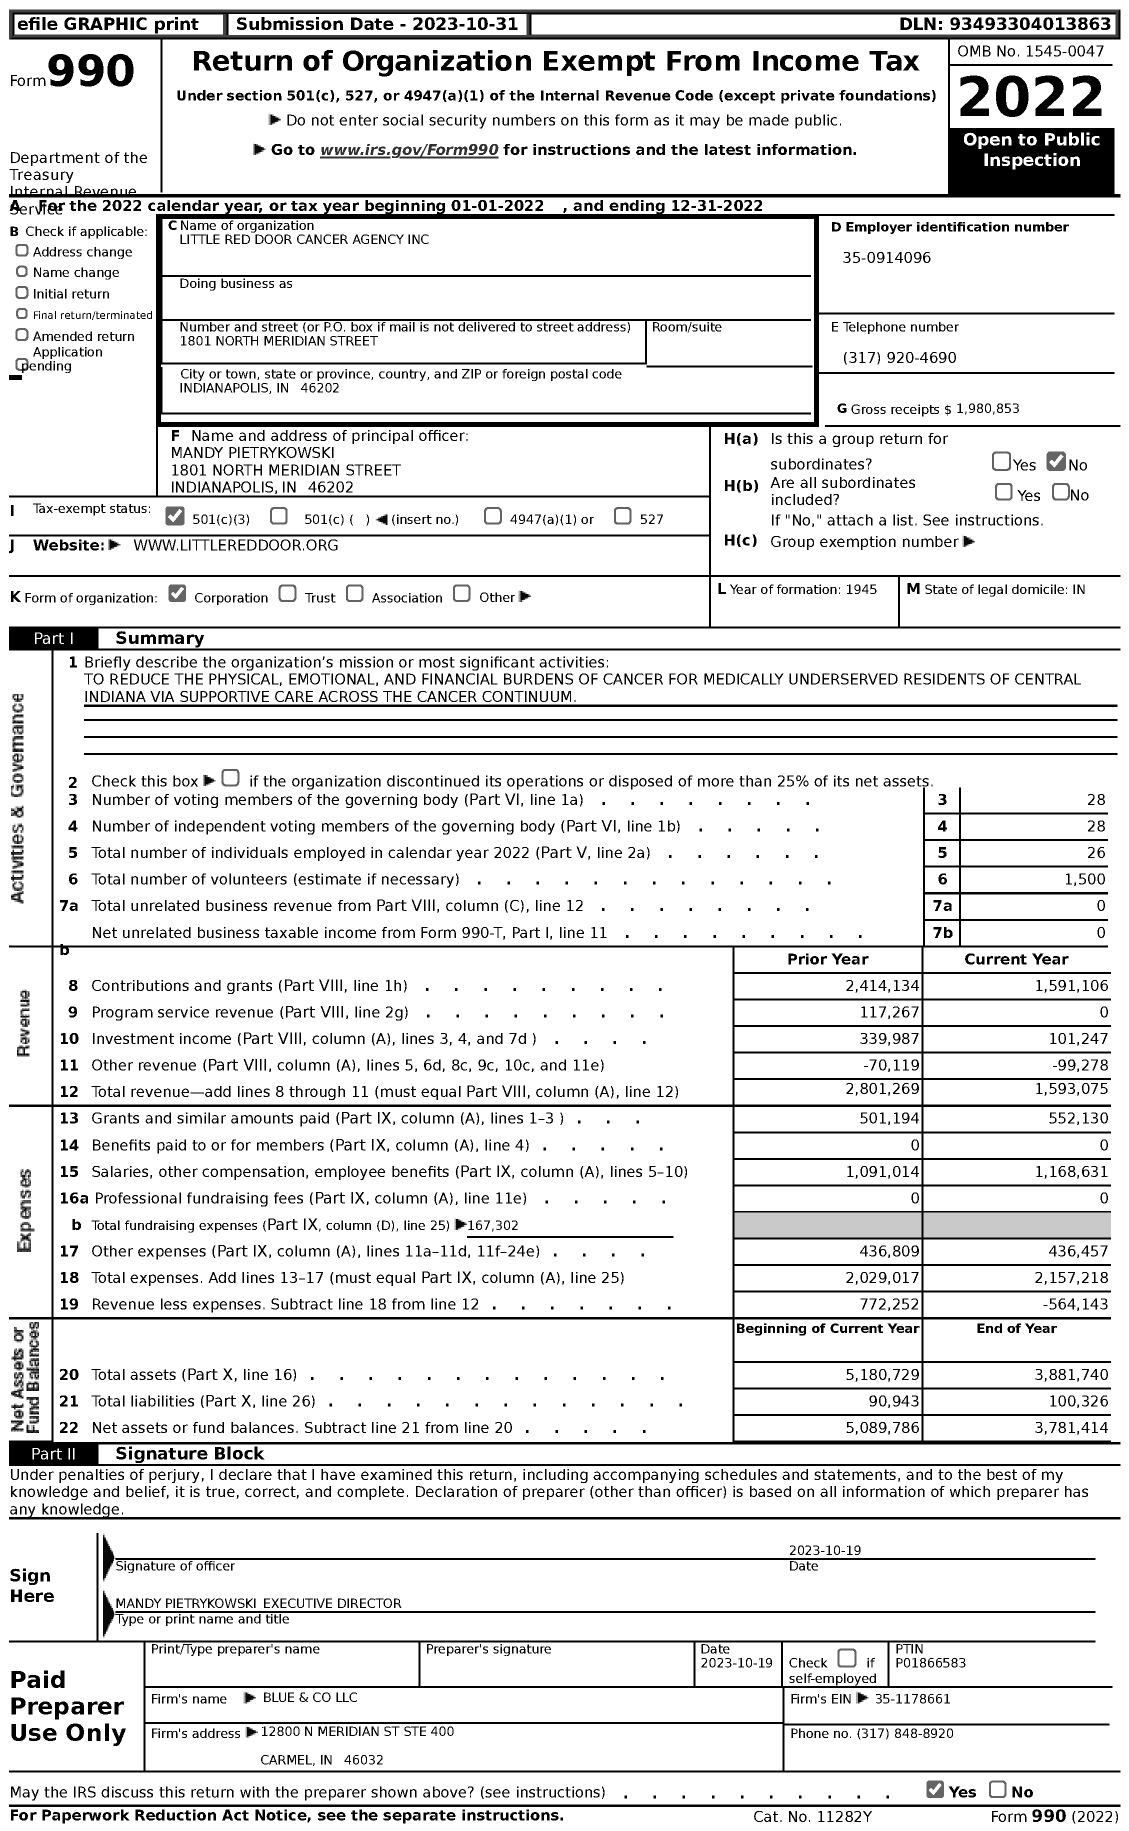 Image of first page of 2022 Form 990 for Little Red Door Cancer Agency